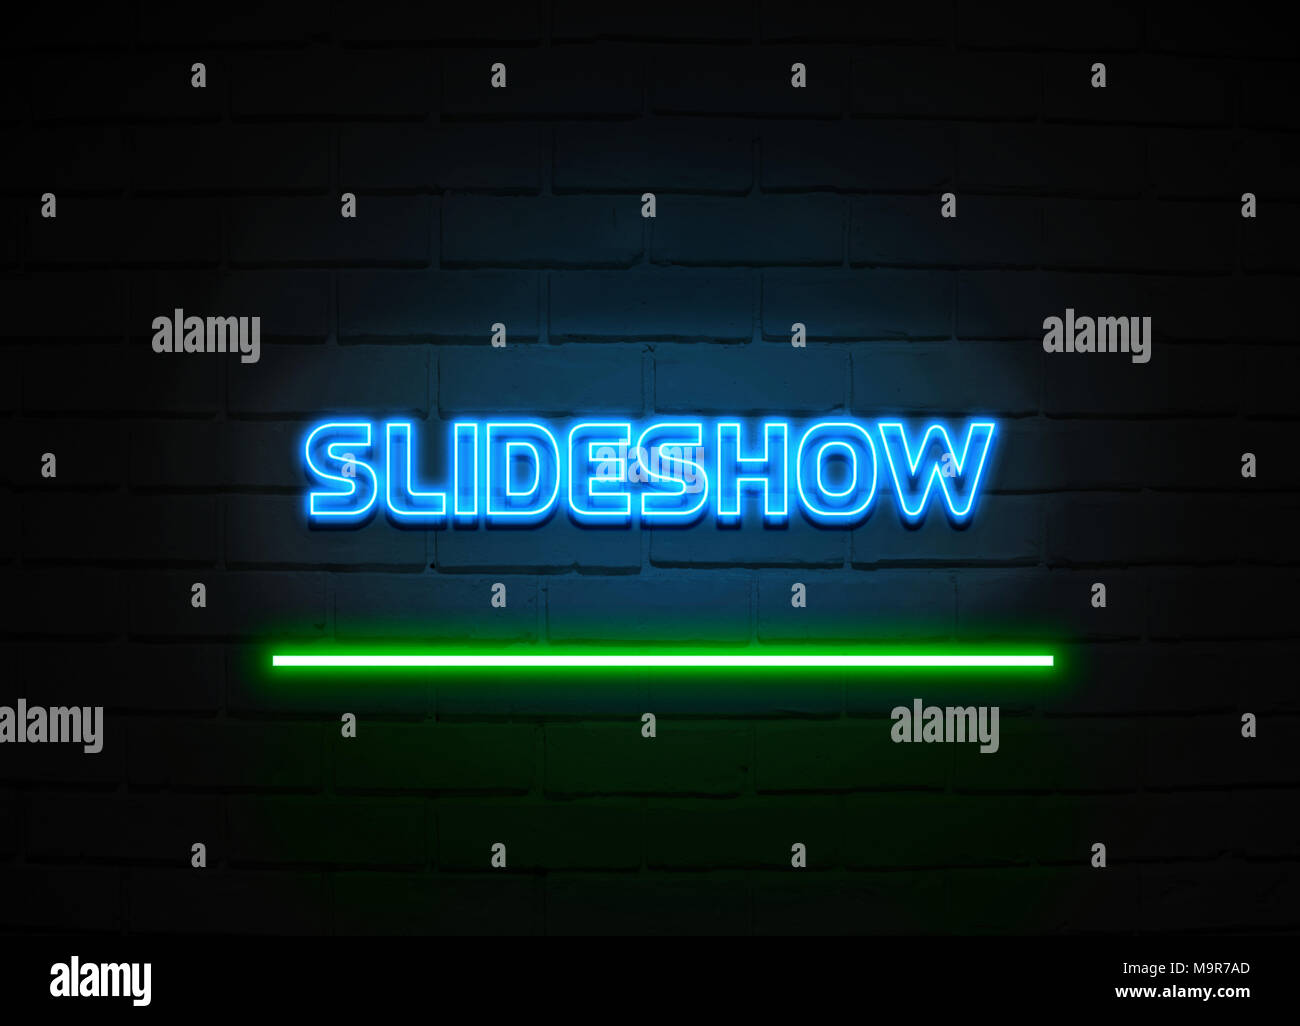 Slideshow neon sign - Glowing Neon Sign on brickwall wall - 3D rendered royalty free stock illustration. Stock Photo